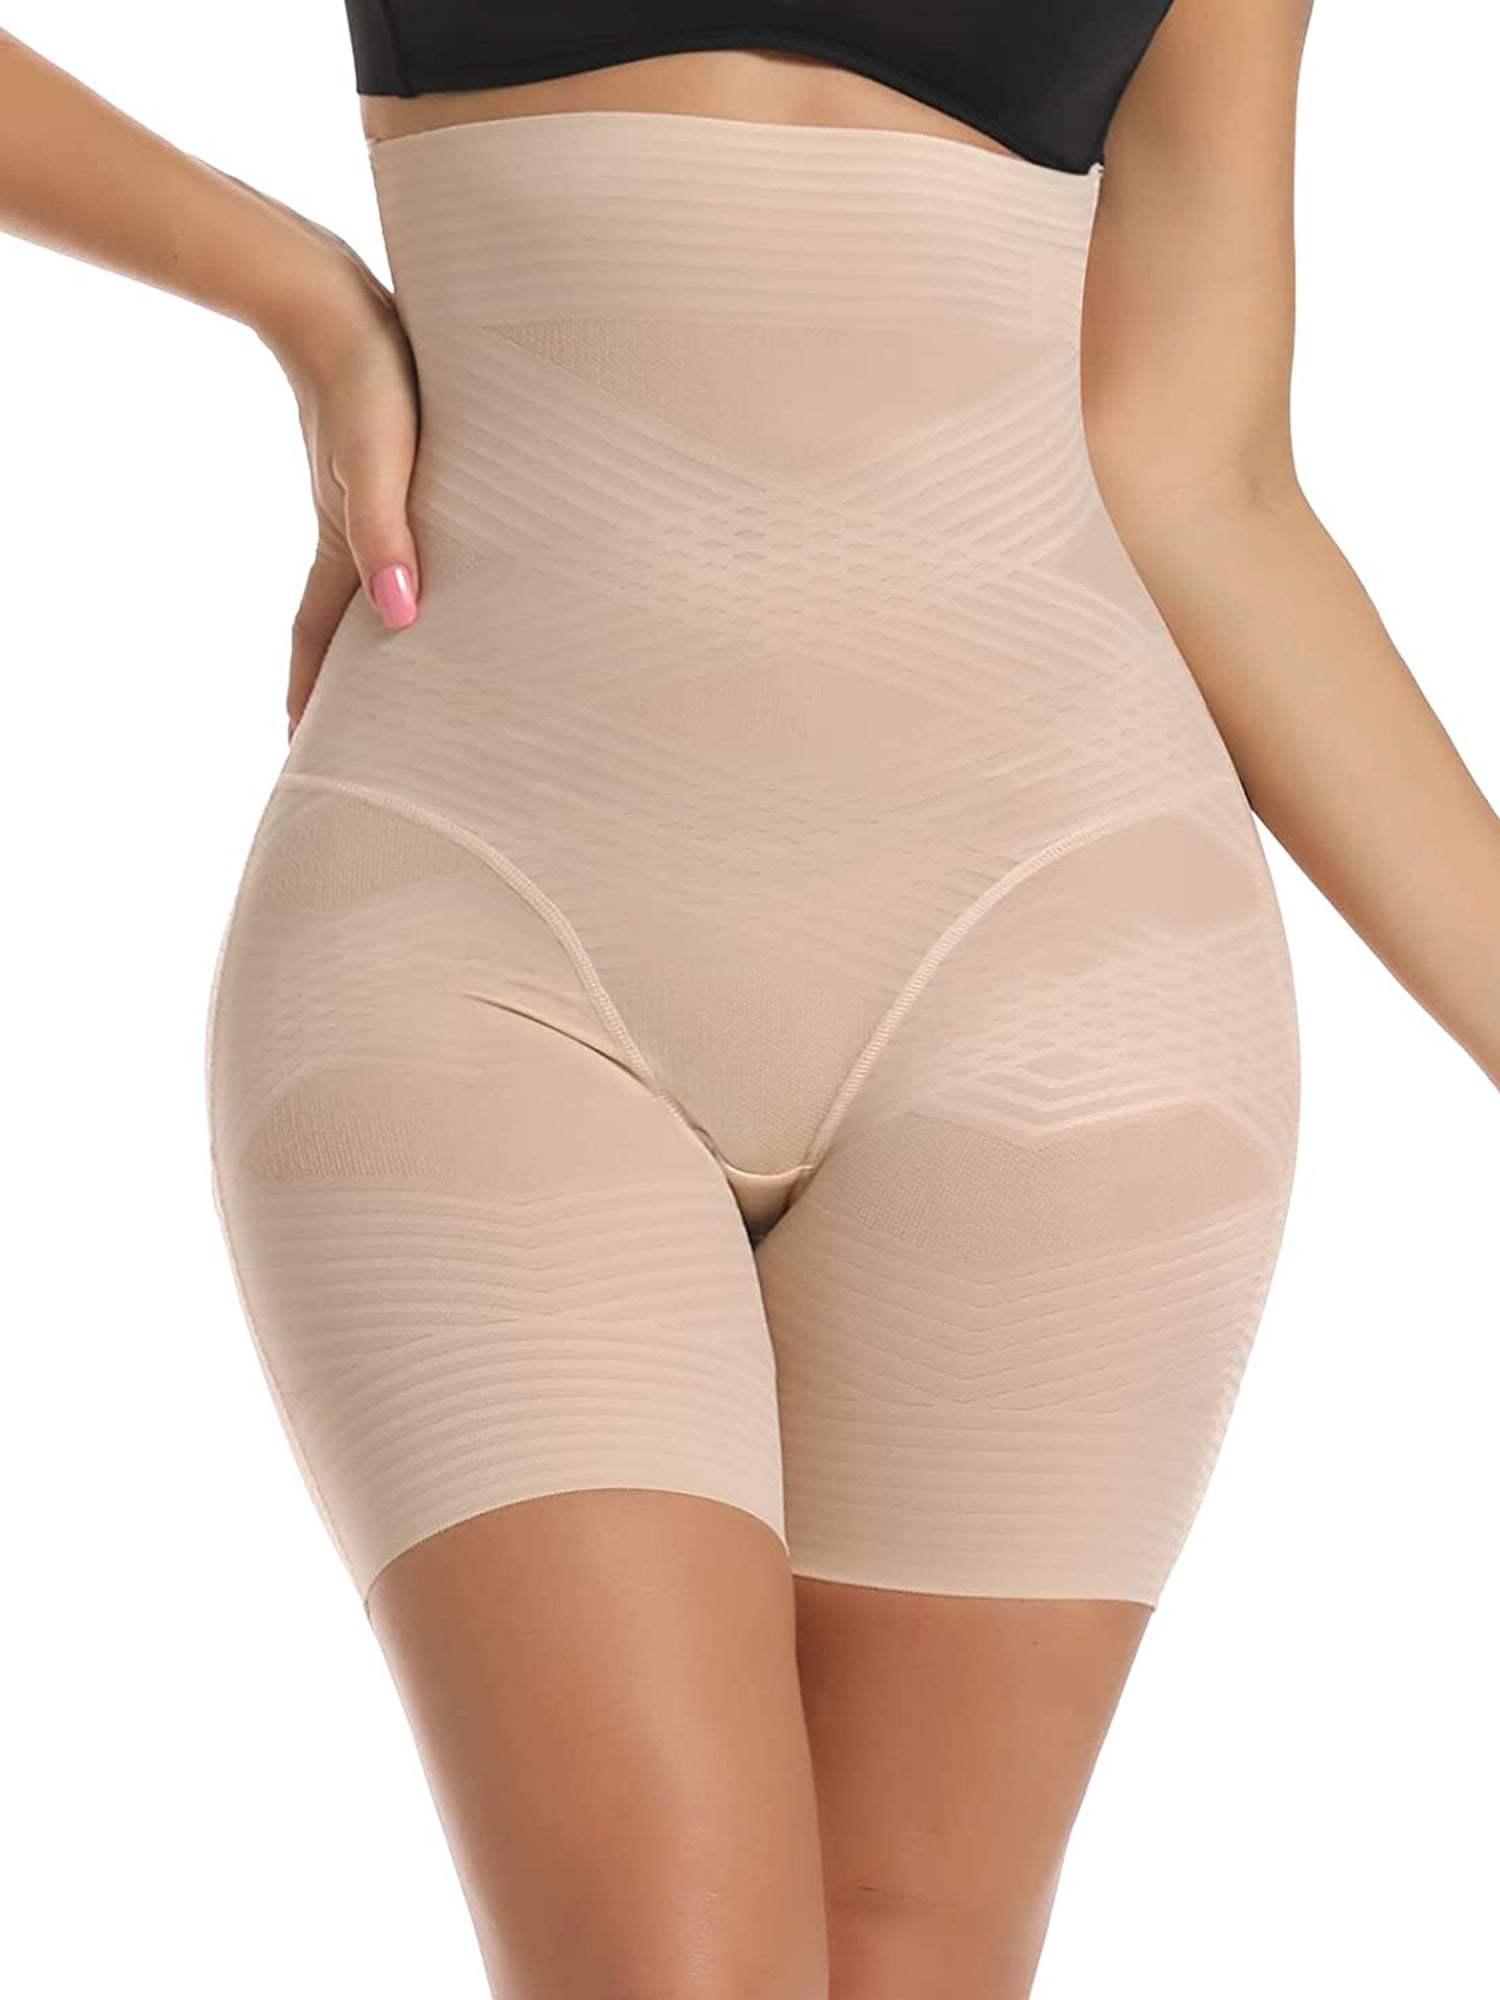 MISS MOLY High Waist Tummy Control Shorts Thigh Slimmer Shapewear Pants for Women Seamless Shaping Panties Panty Slimming Butt Lifter Underwear Briefs Knickers Body Shaper 